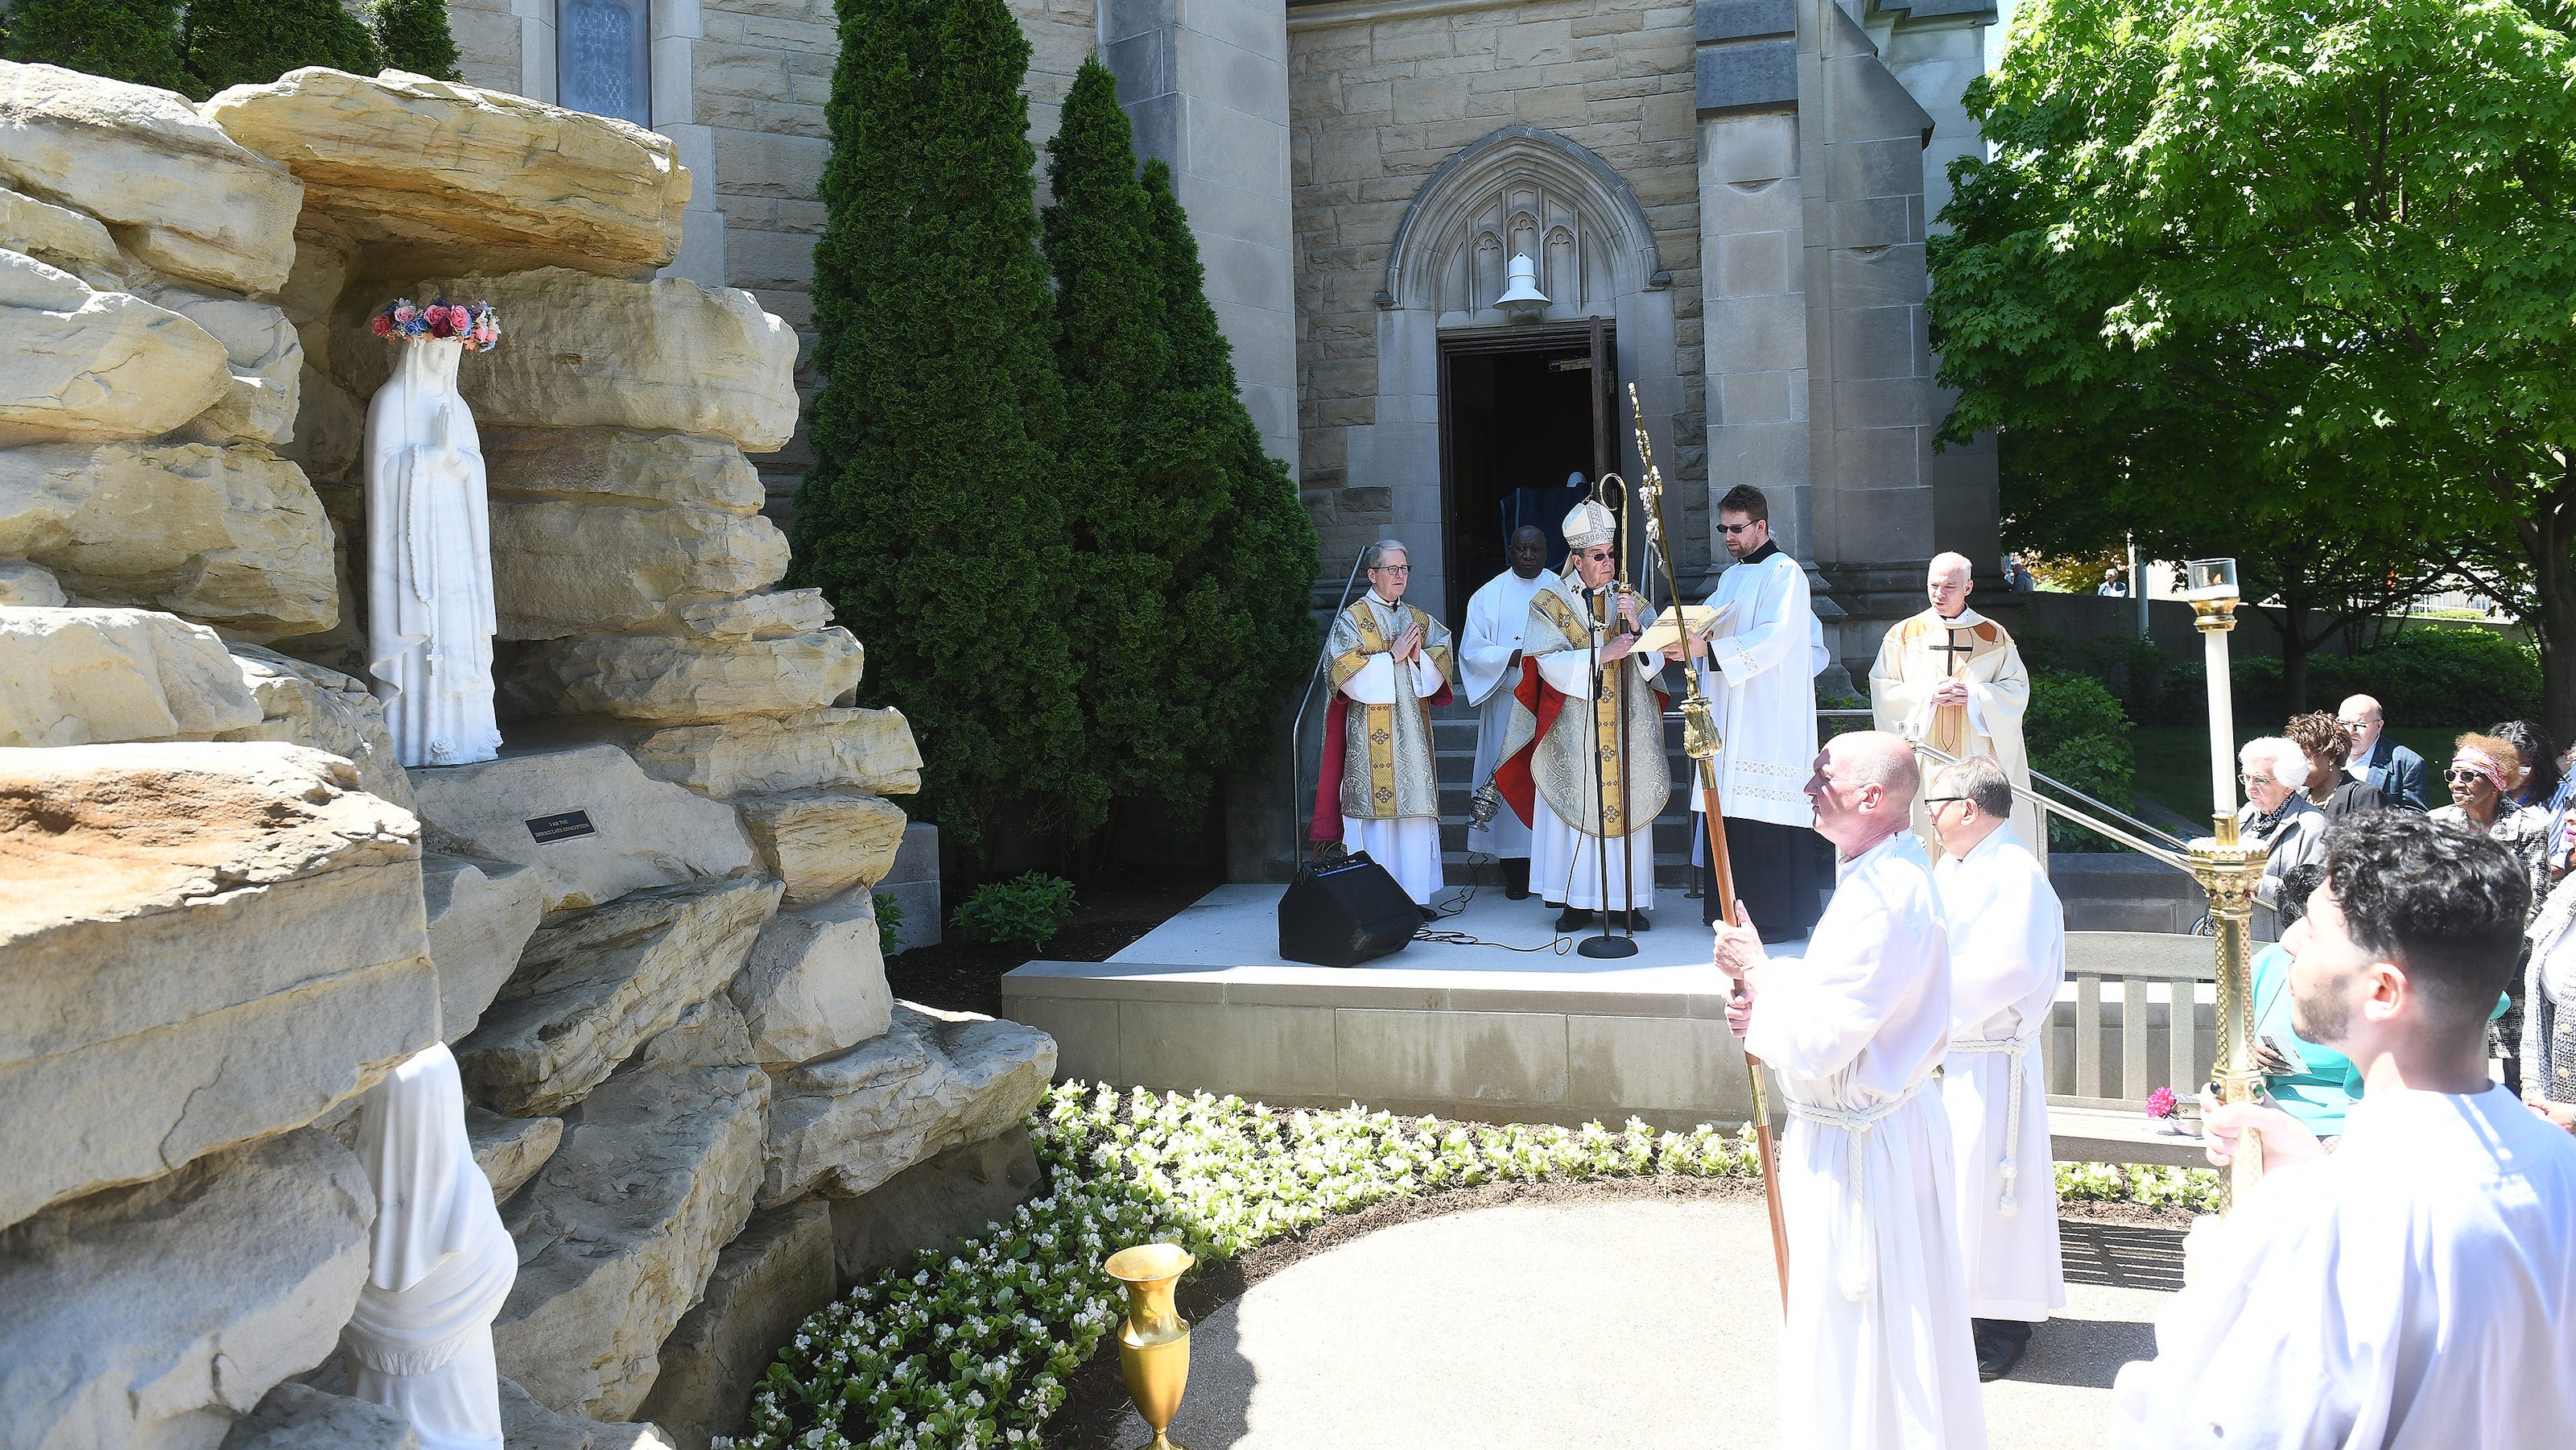 Detroit Archdiocese opens long-anticipated grotto with Virgin Mary statue on Mother's Day